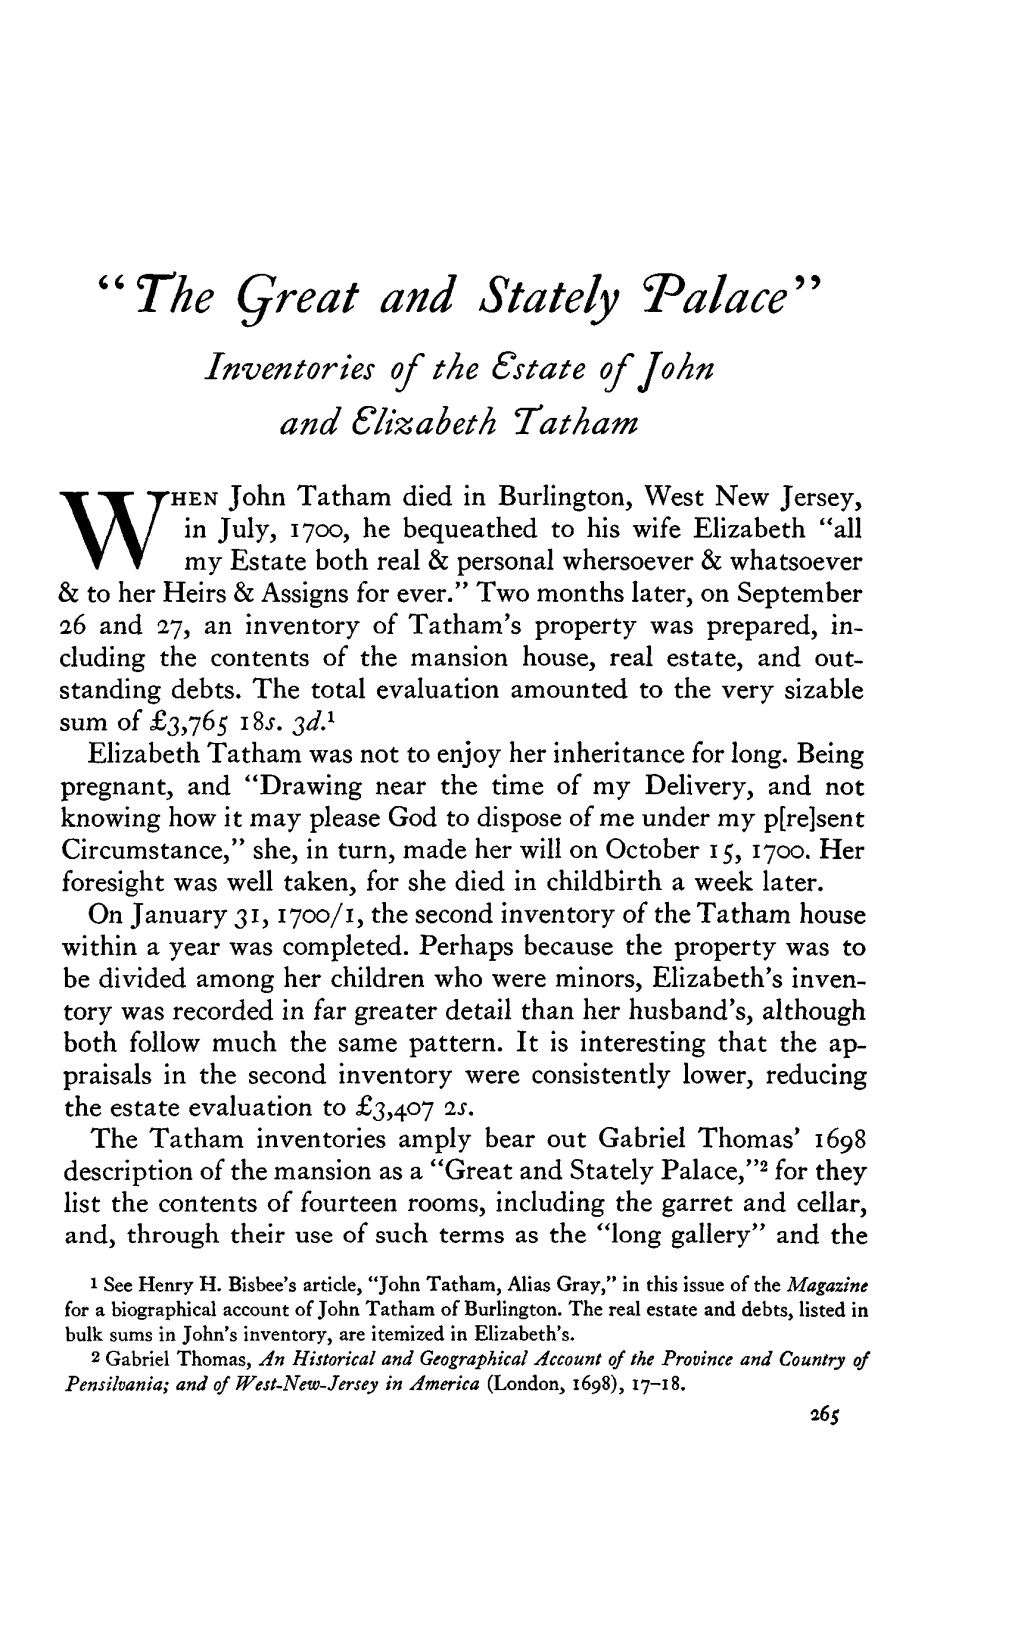 "The Great and Stately Palace" Inventories of the Estate of John and Elizabeth Tatham